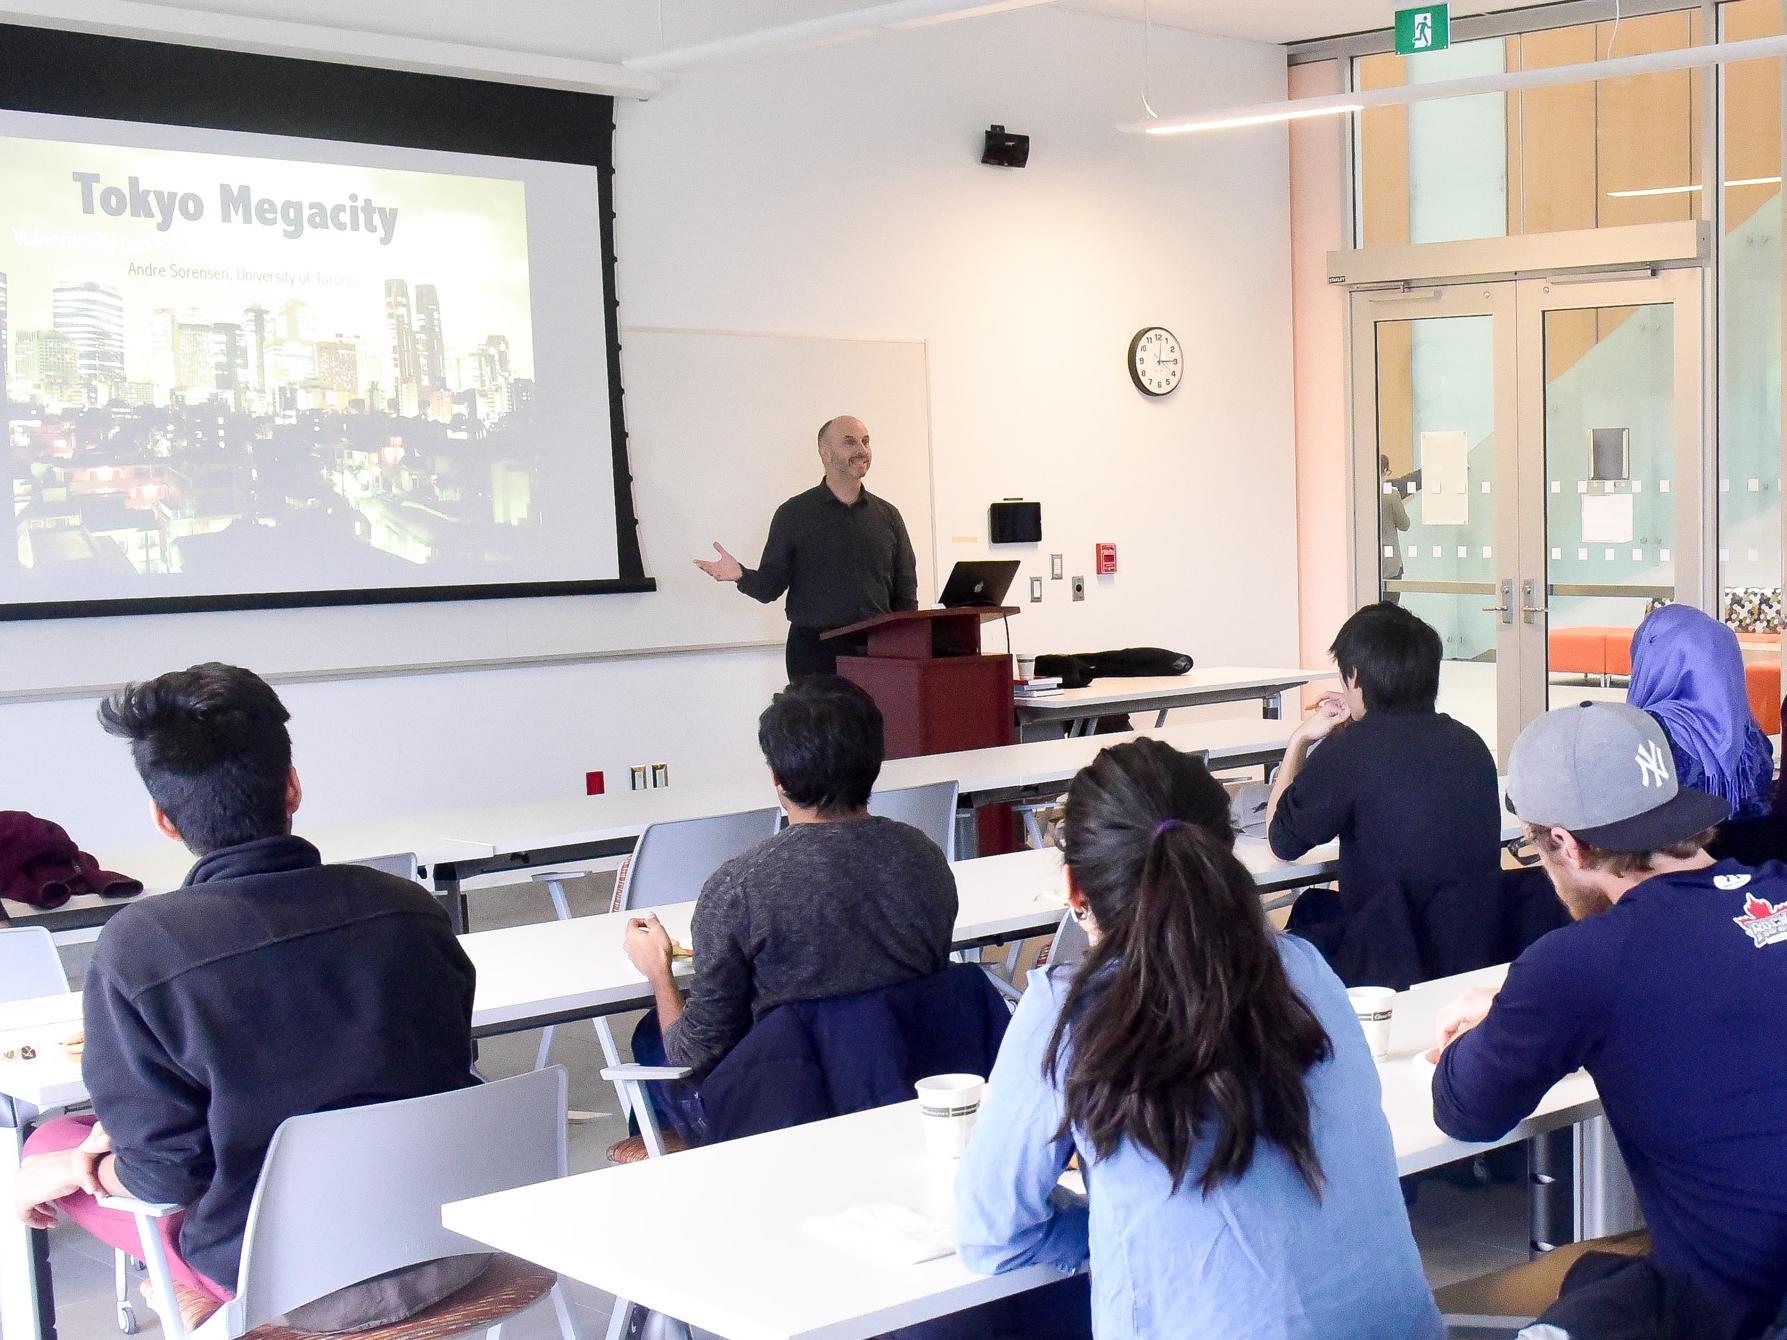 A professor in front of a slide that says Tokyo Megacity, with students listening in the foreground in a classroom setting